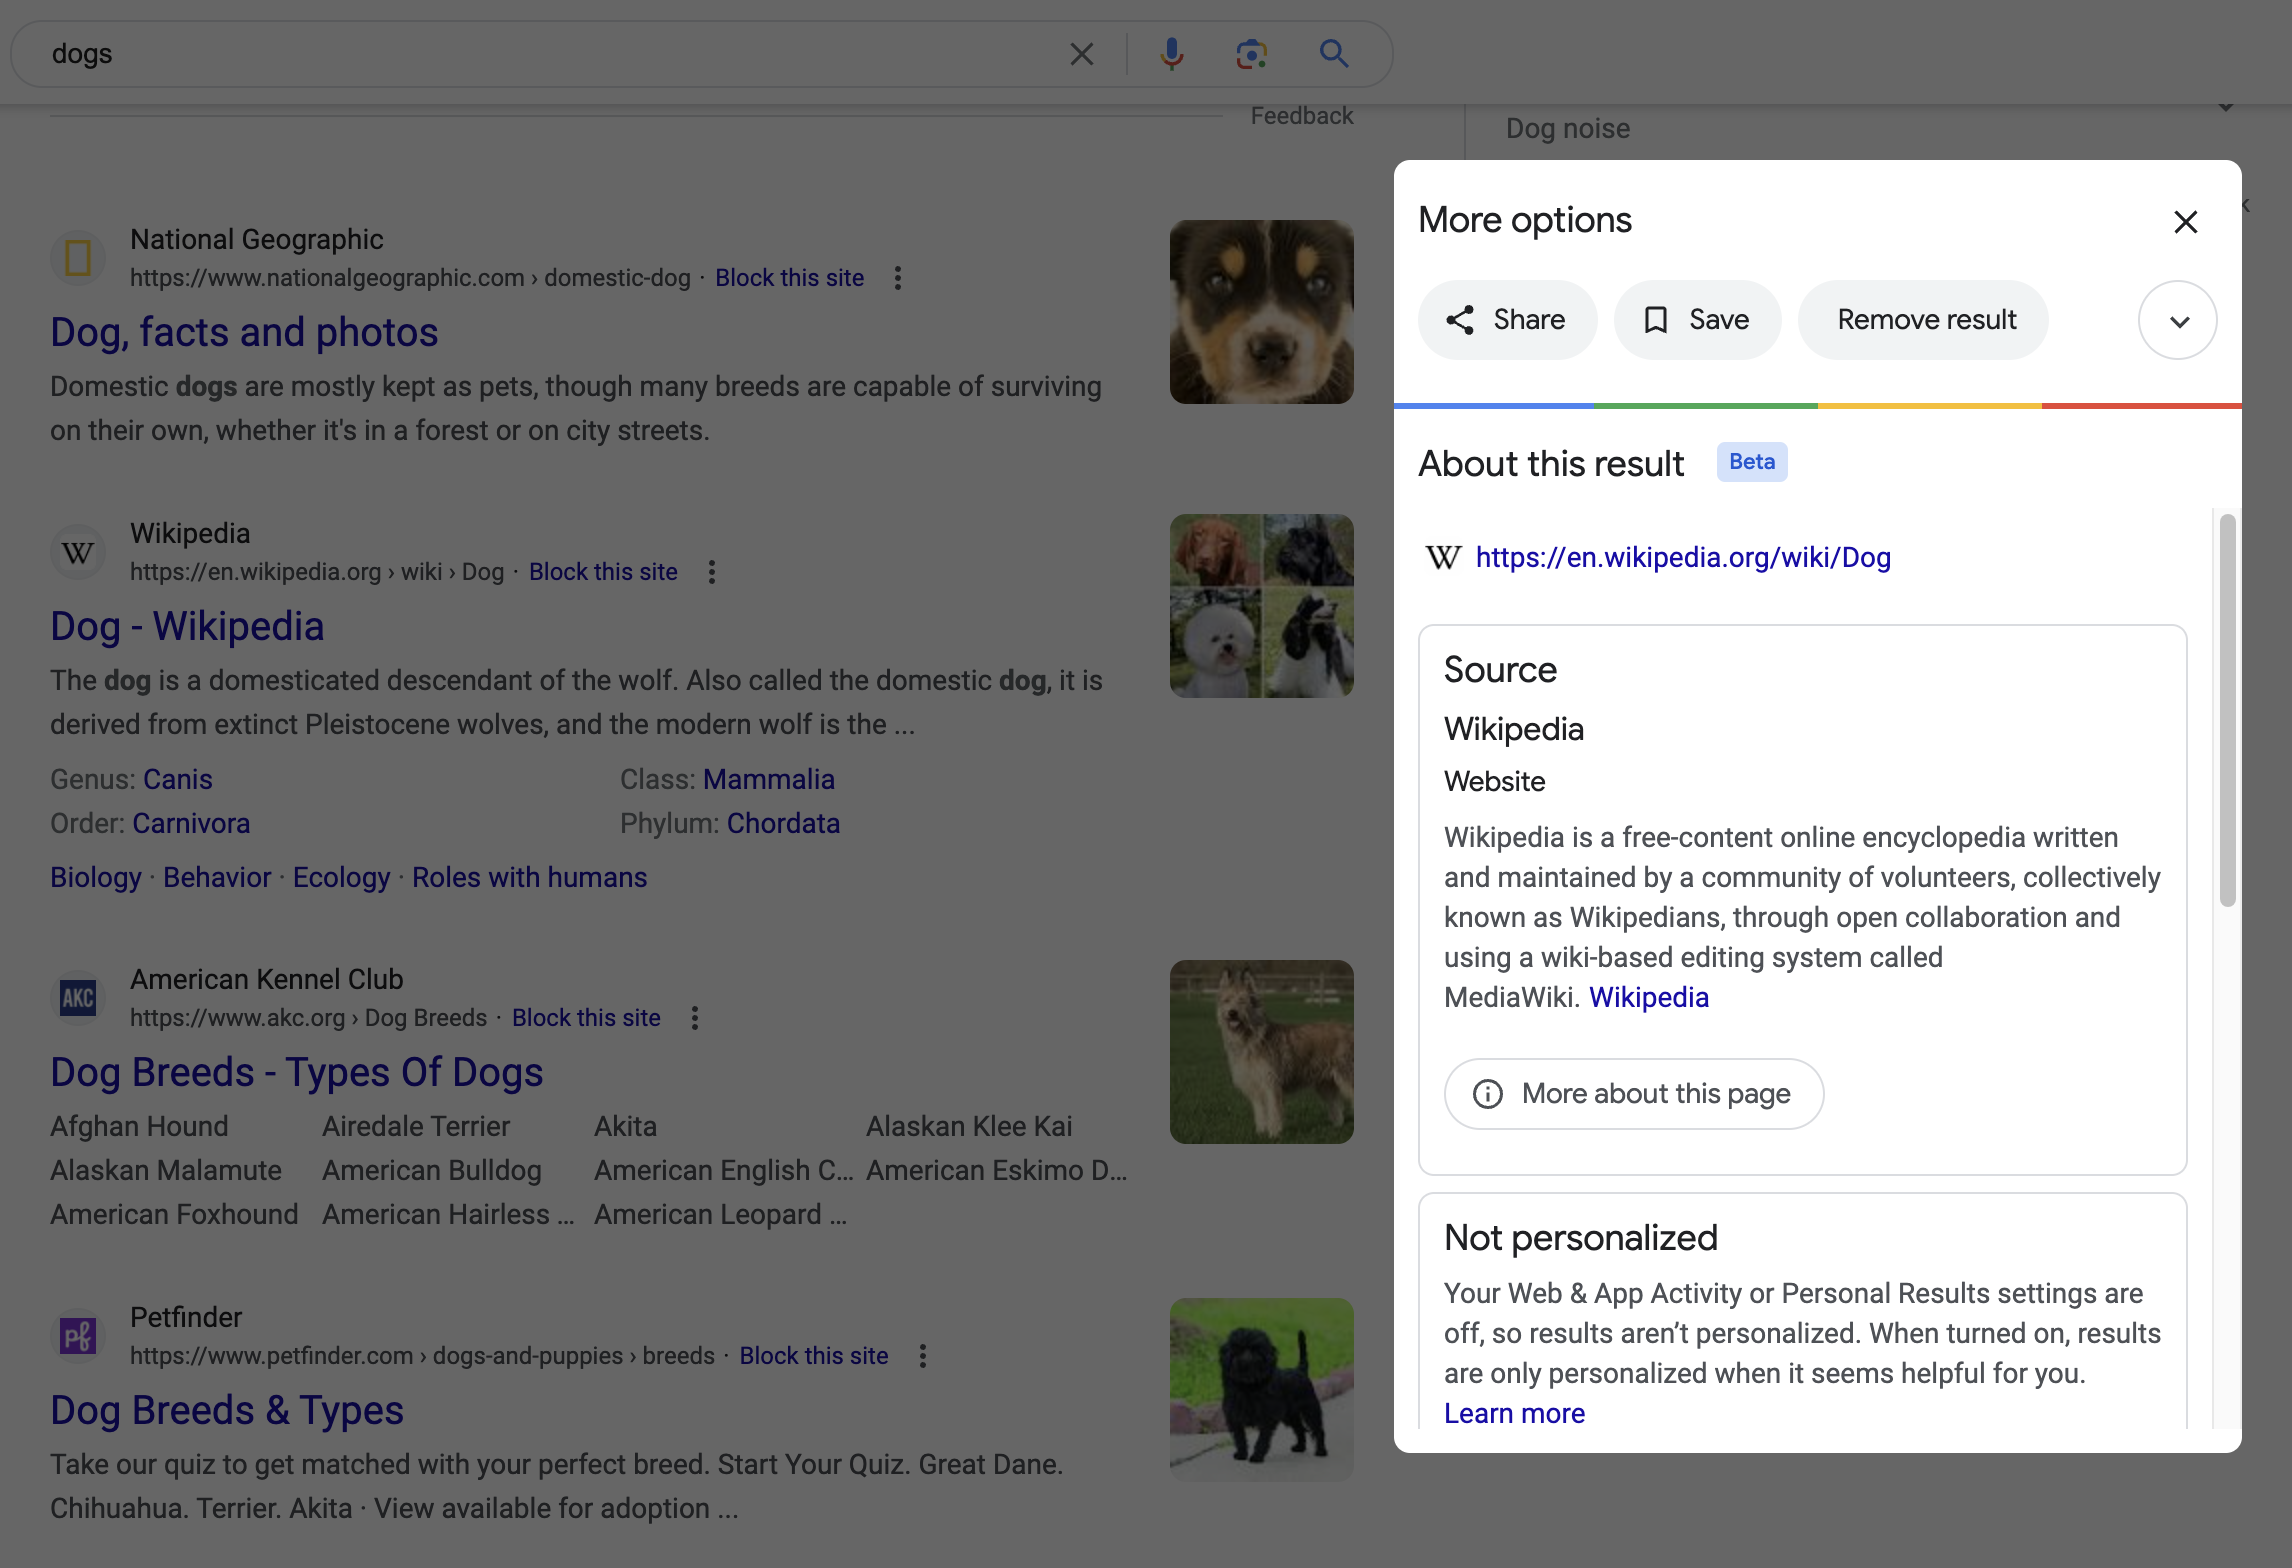 A Google search result for dogs, showing four results in the background. A transparent black backdrop covers each result. On the right-hand side of the screen is a modal dialog that sits above the backdrop. The dialog's title is 'More options'. Below that are three large buttons to 'Share', 'Save', and 'Remove result'. Underneath that is a subtitle of 'About this result' with a badge labeled, 'Beta' appended to it. Following that is a URL for the Enlgish Wikipedia page for dogs. There are then two small cards. The first card has a title of 'Source: Wikipedia' with a subtitle of 'Website'. There is then a short description of what Wikipedia is, sourced from Wikipedia itself. The second card has a title of 'Not personalized'. Following thatis a short sentence that reads, 'Your Web & App Activity or Personal Results settings are off, so results aren't personalized. When turned on, results are only personalized when it seems helpful for you. Learn more'.